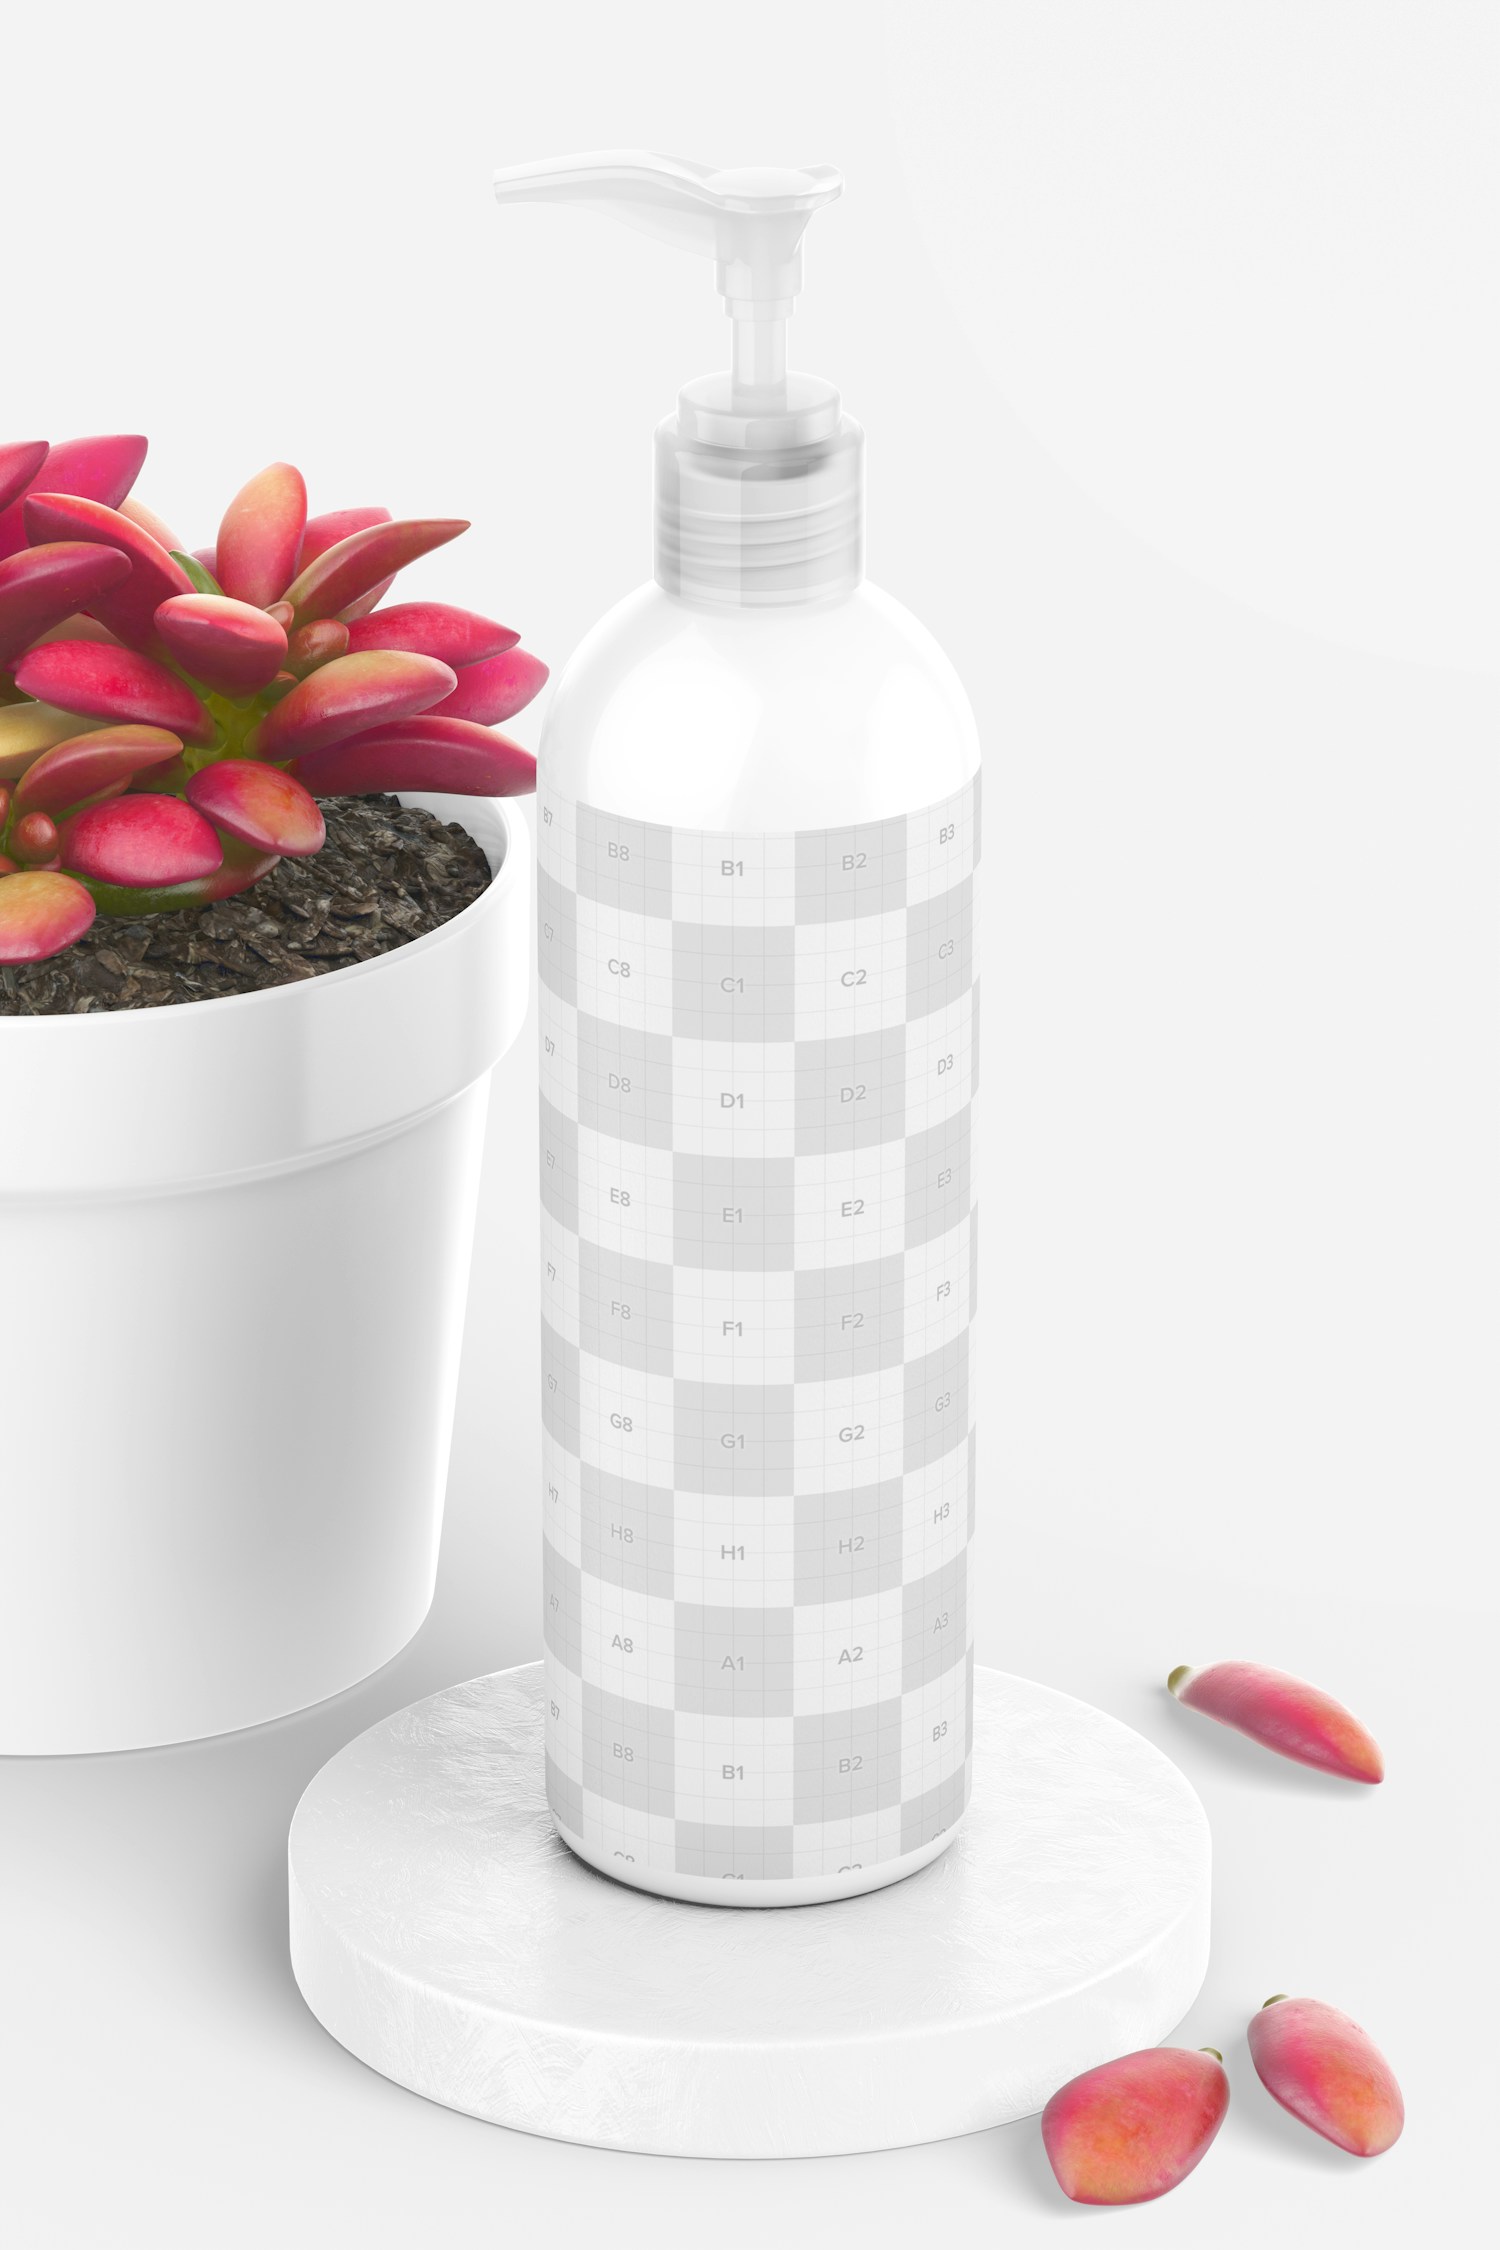 12 oz Pump Rounded Bottle with Pot Plant Mockup